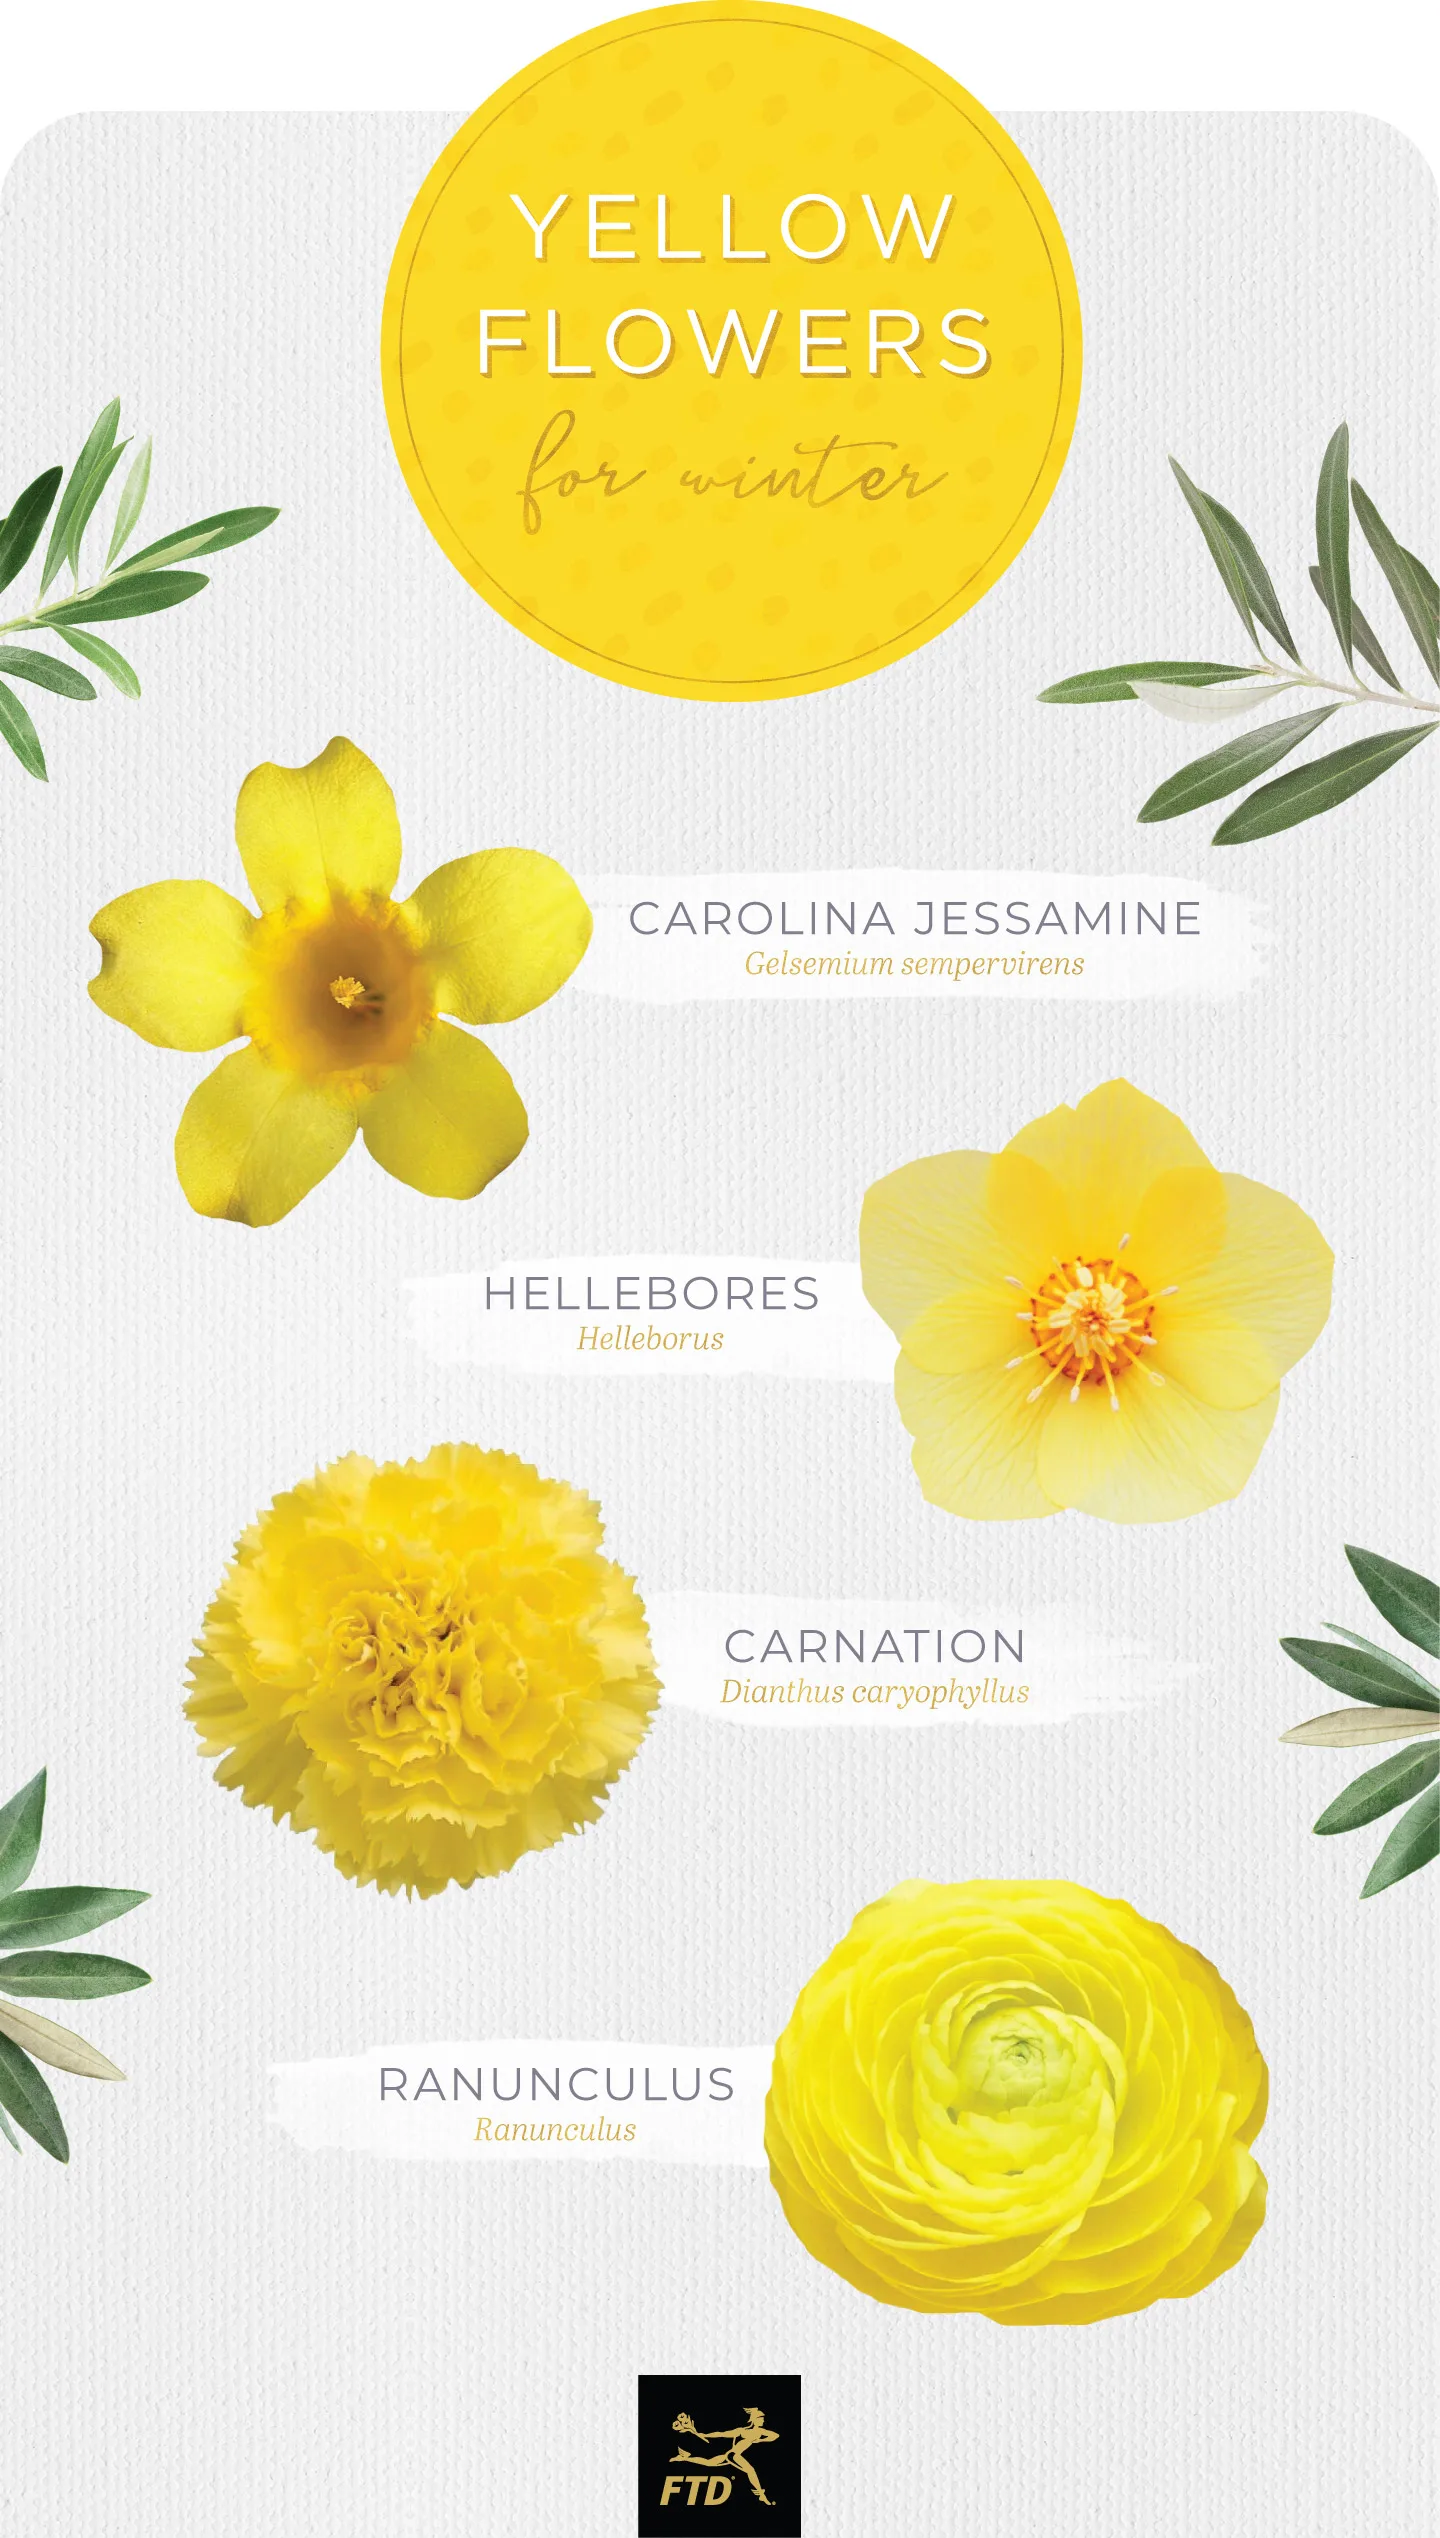 30 Types of Yellow Flowers